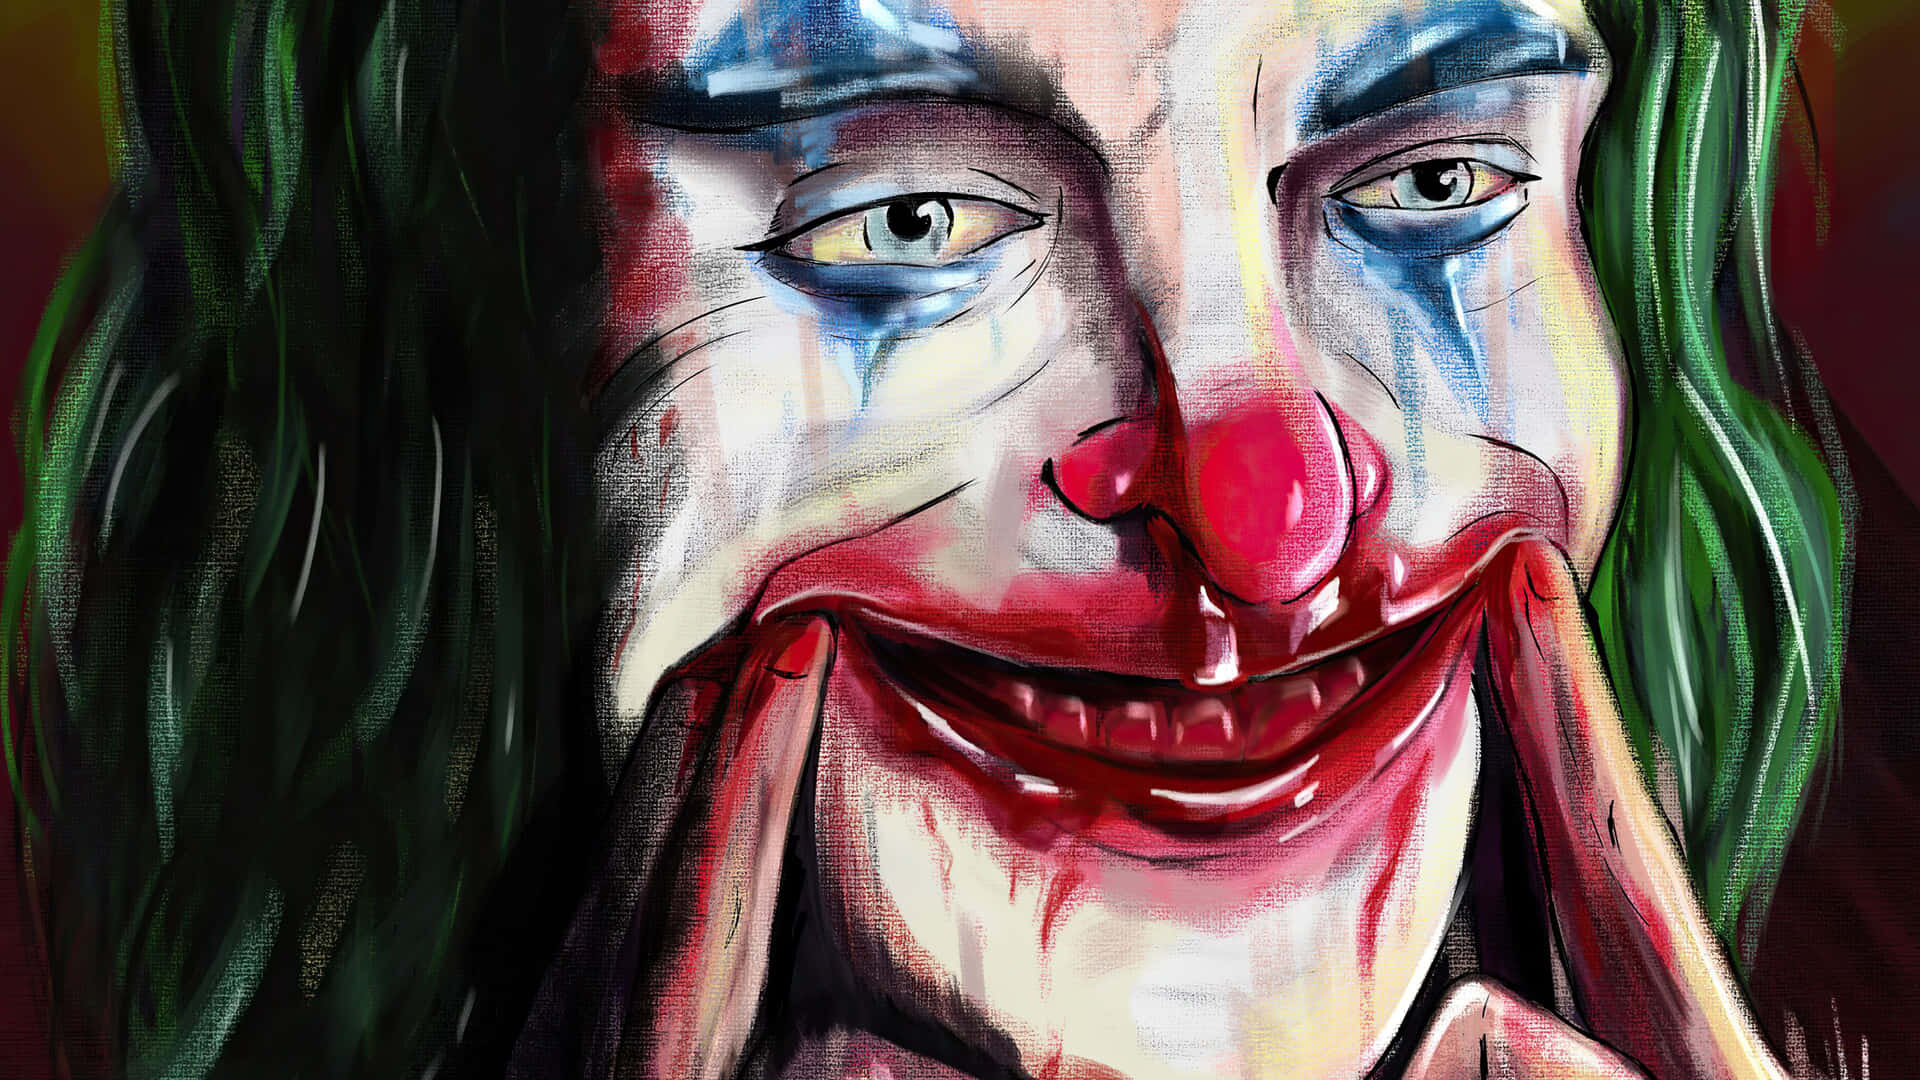 Intense Joker Painting Showcasing the Dark Side of a Twisted Mind Wallpaper